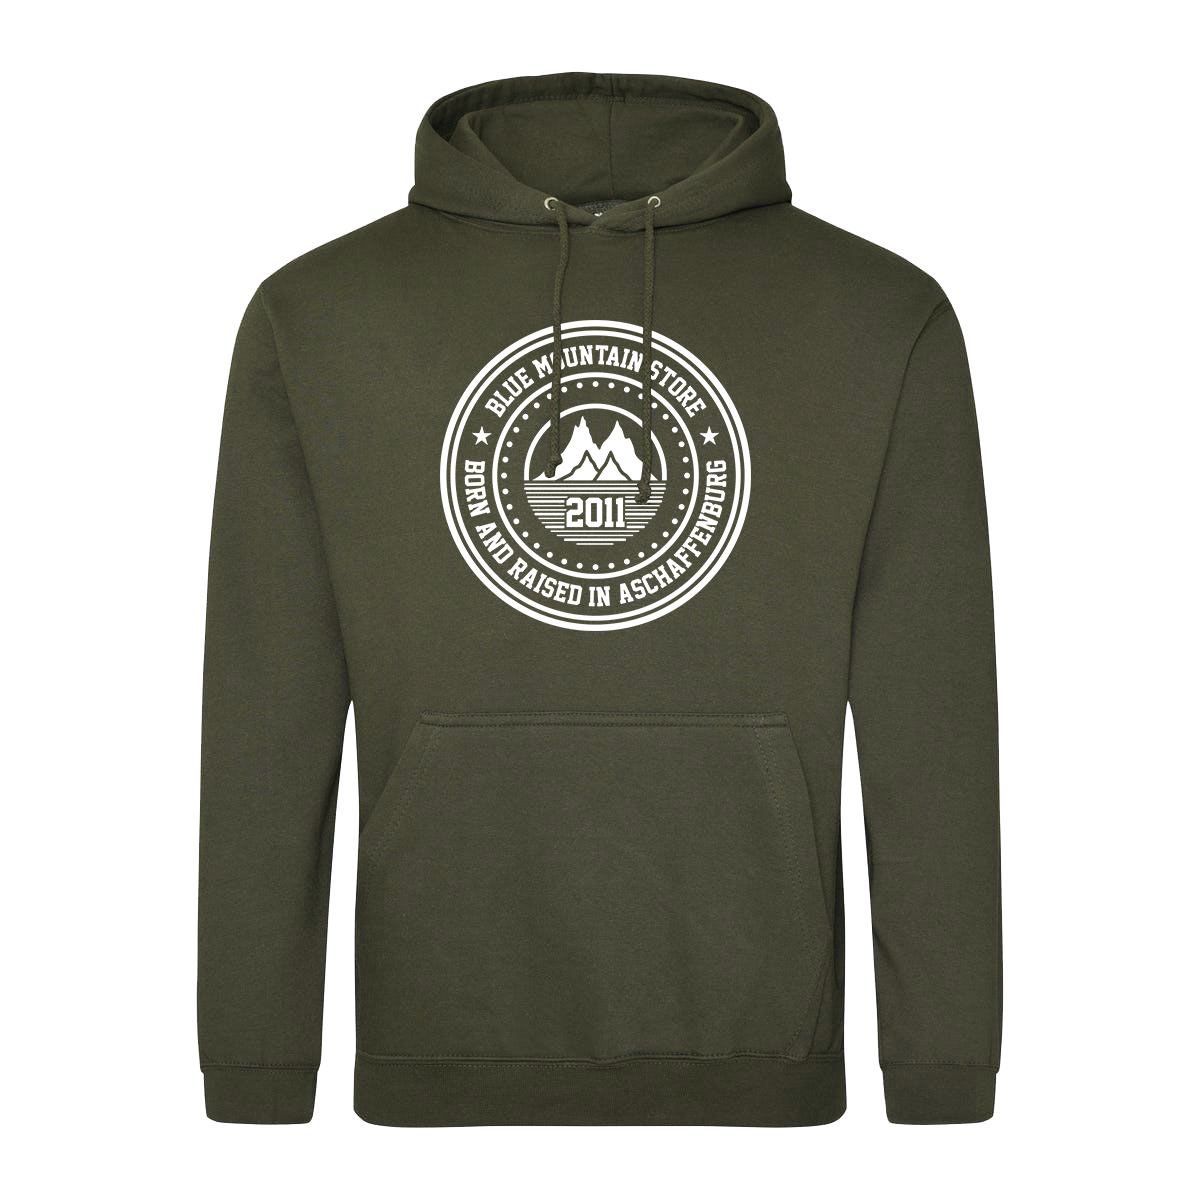 BMS "BAR" Hoodie (olive/white) - Blue Mountain Store